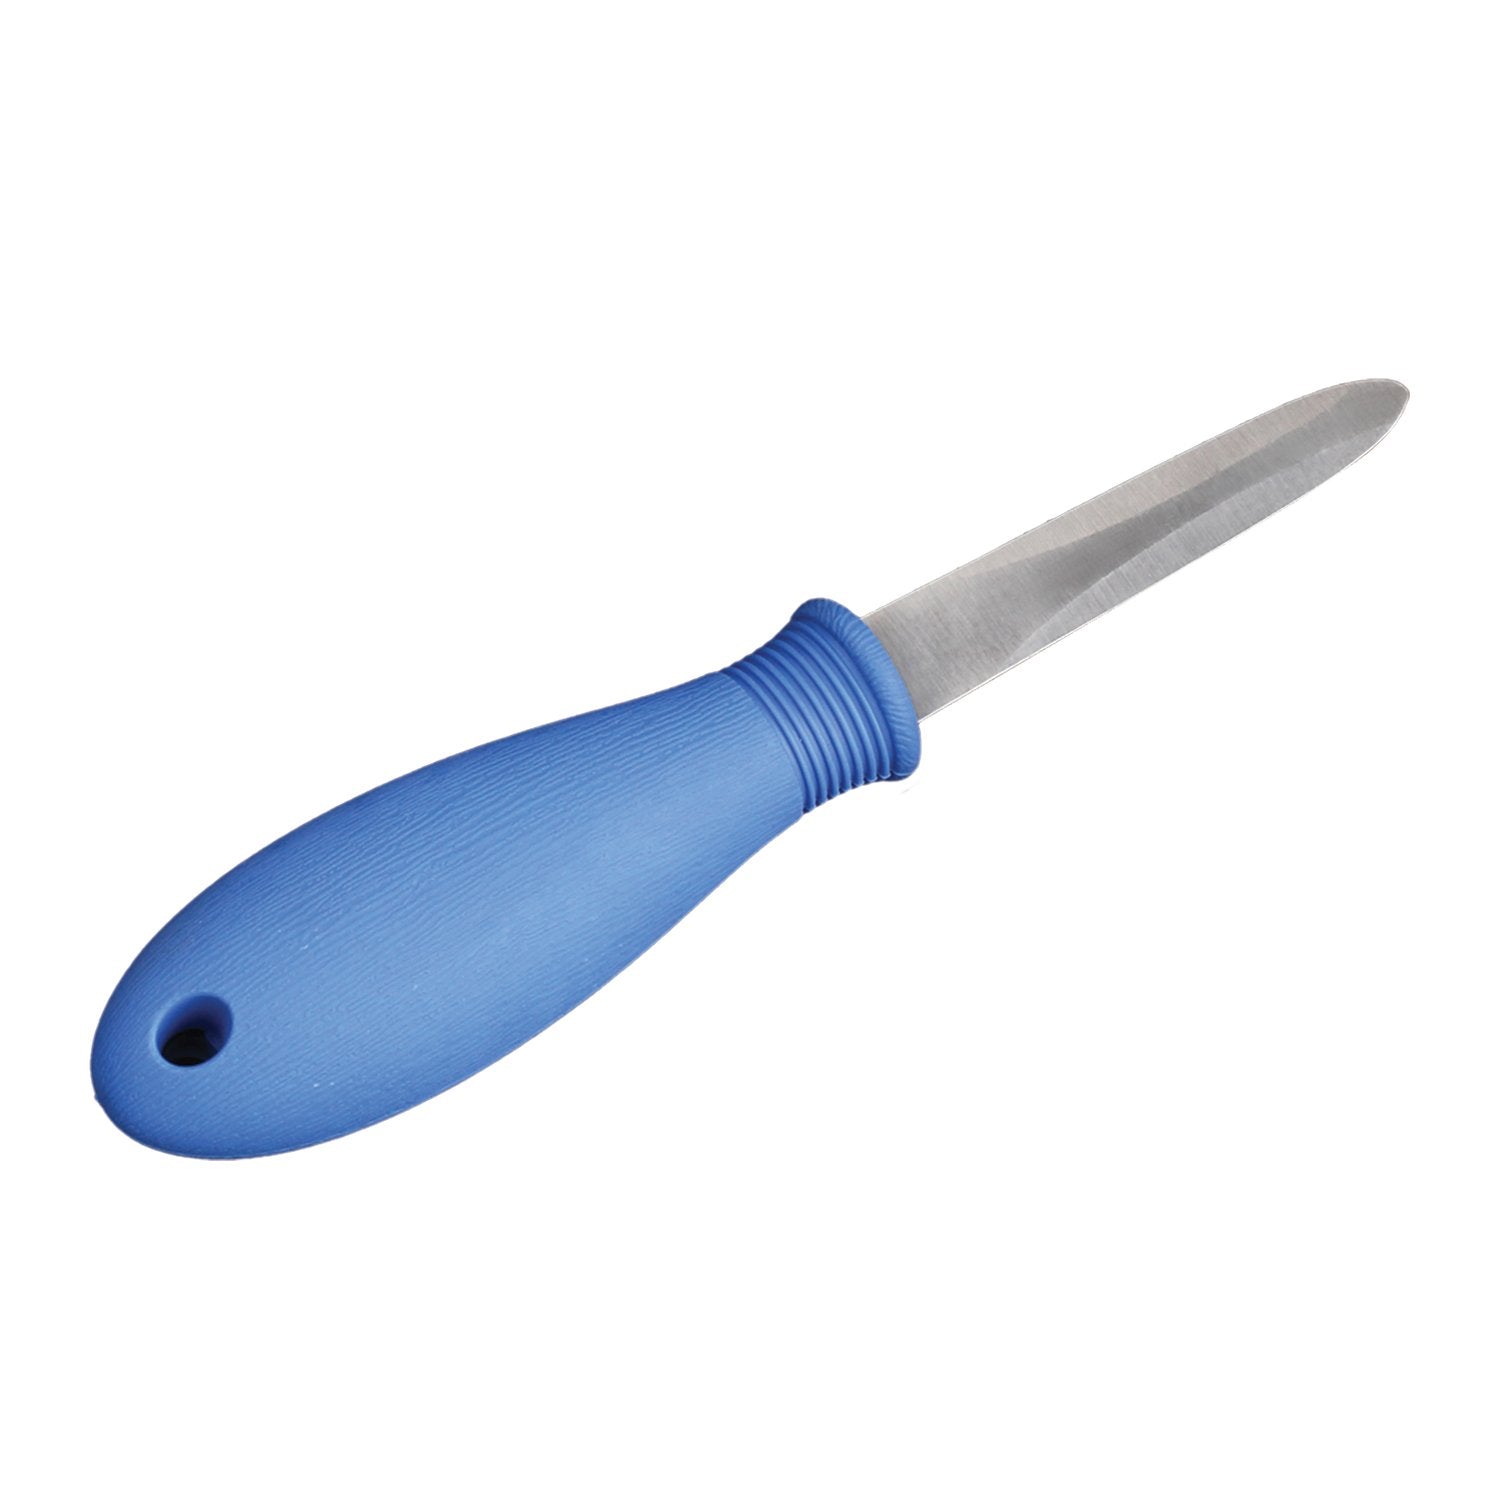 Sea Striker oyster knife with blue handle